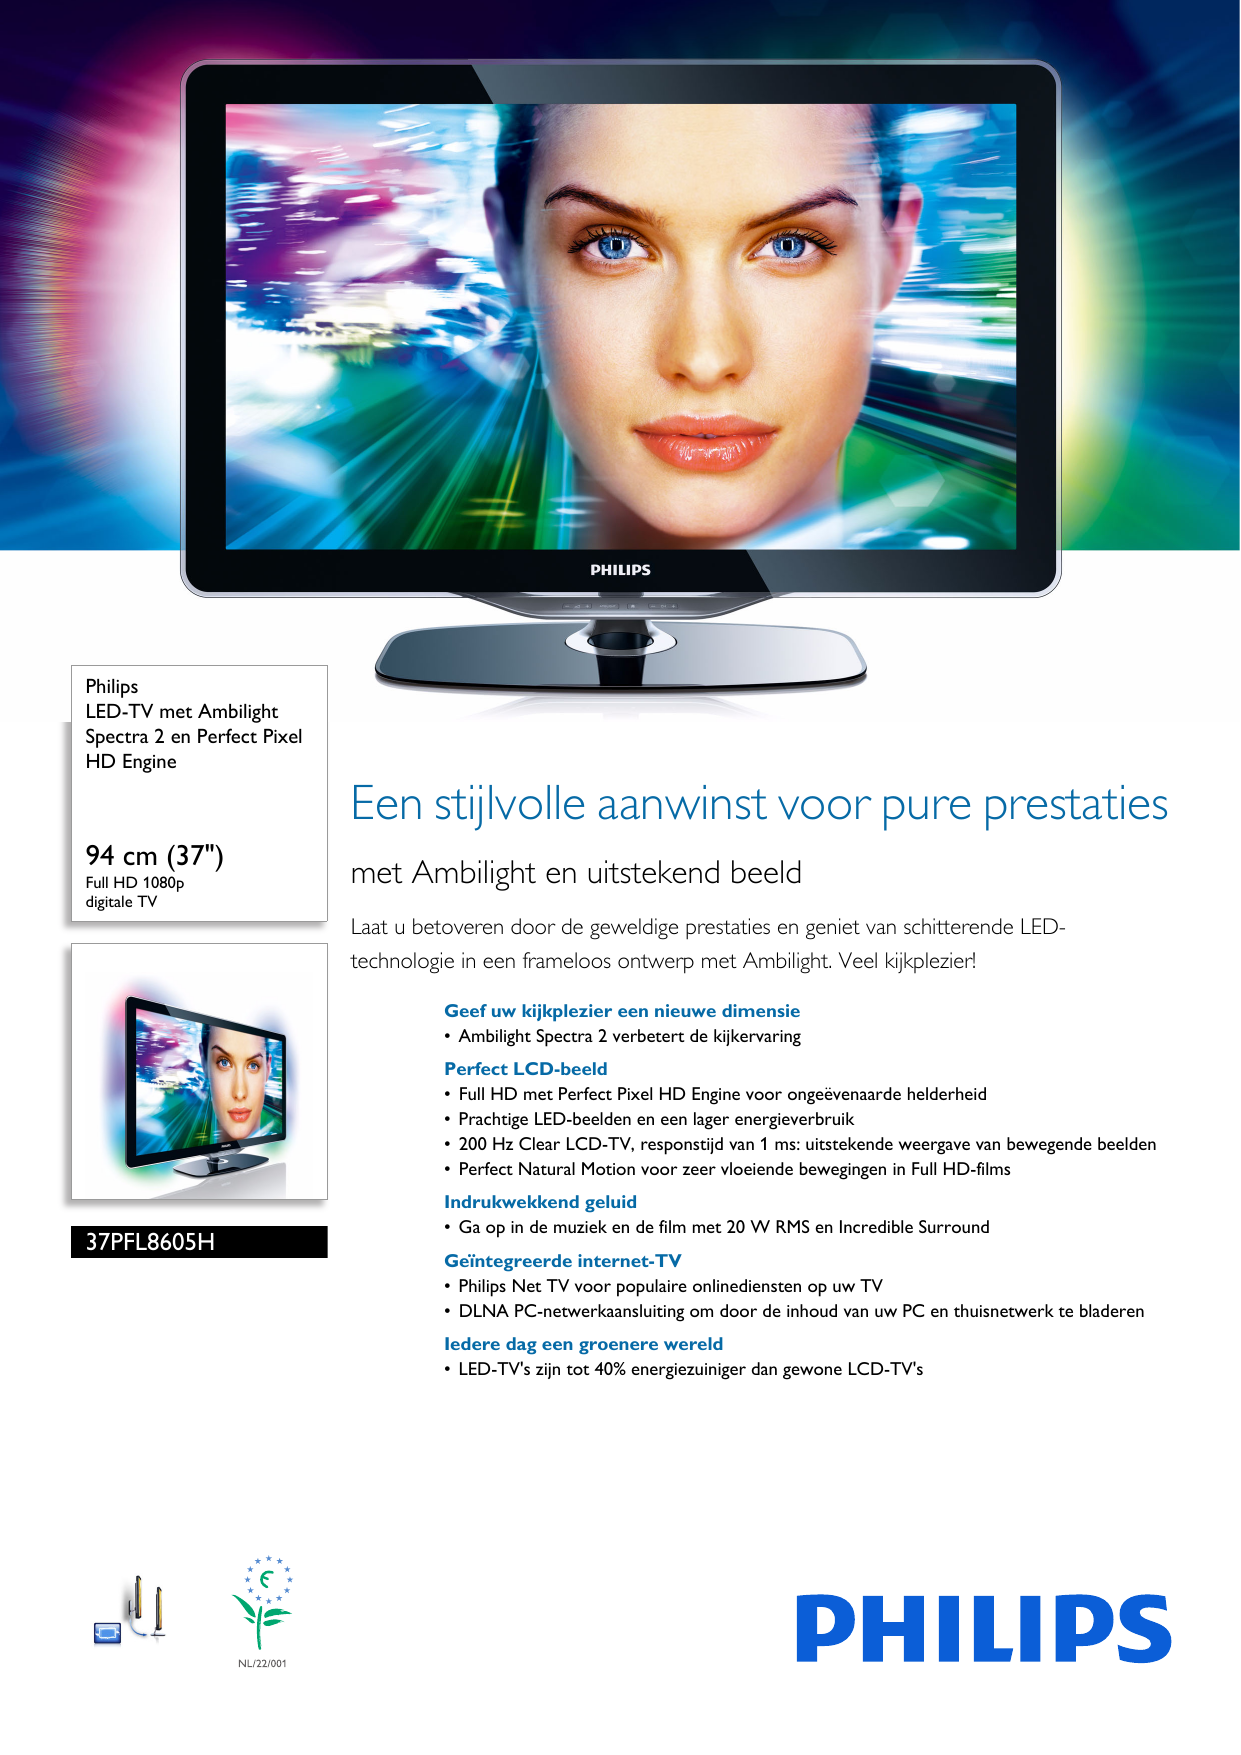 Page 1 of 3 - Philips 37PFL8605H/12 LED-TV Met Ambilight Spectra 2 En Perfect Pixel HD Engine User Manual Brochure 37pfl8605h 12 Pss Nldbe